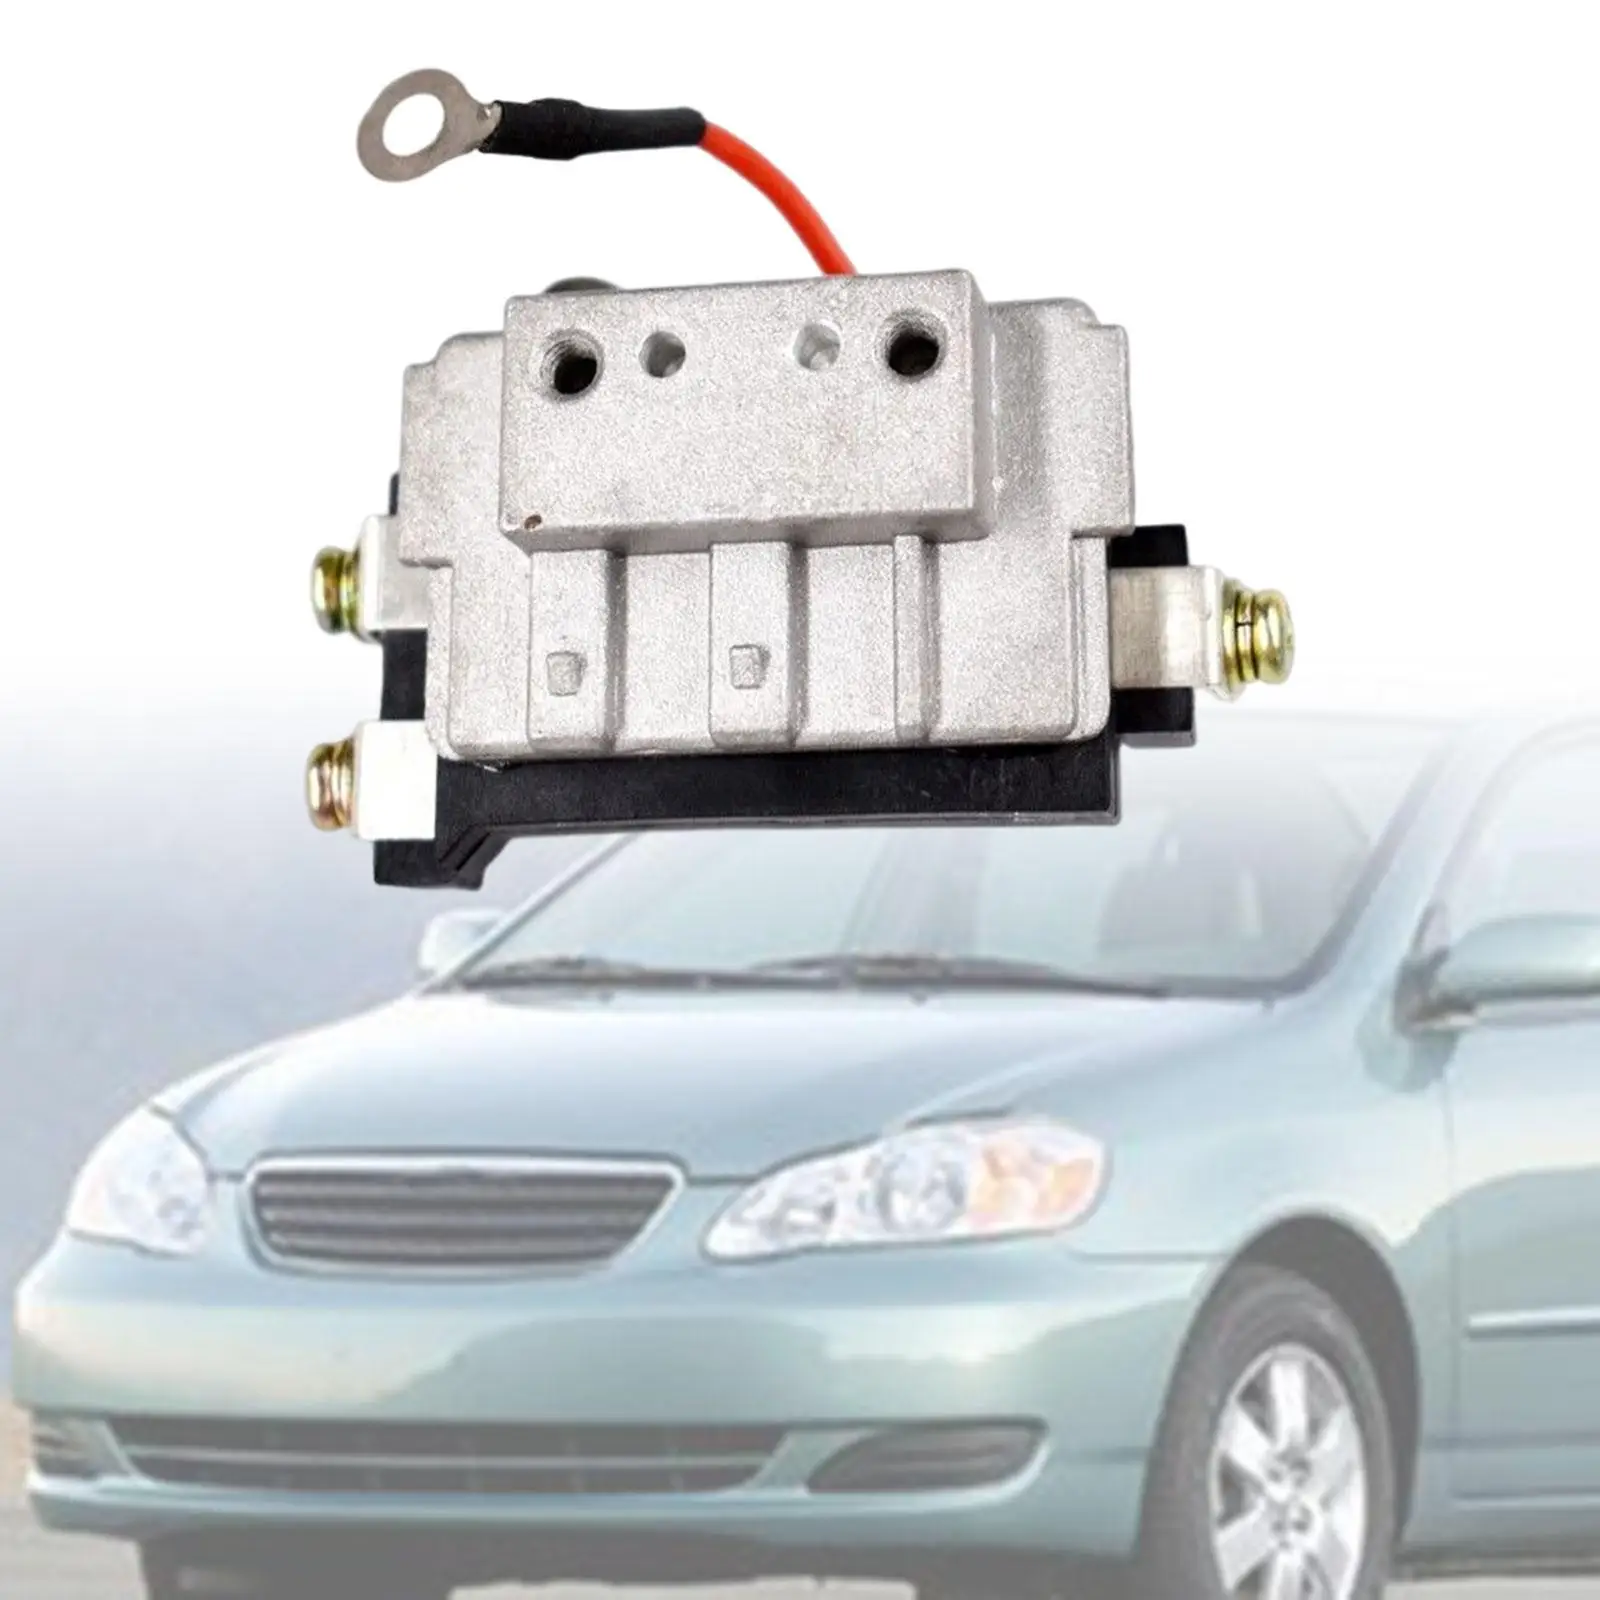 89620-12440 Ignition Control Module Replaces Durable for Toyota Corolla